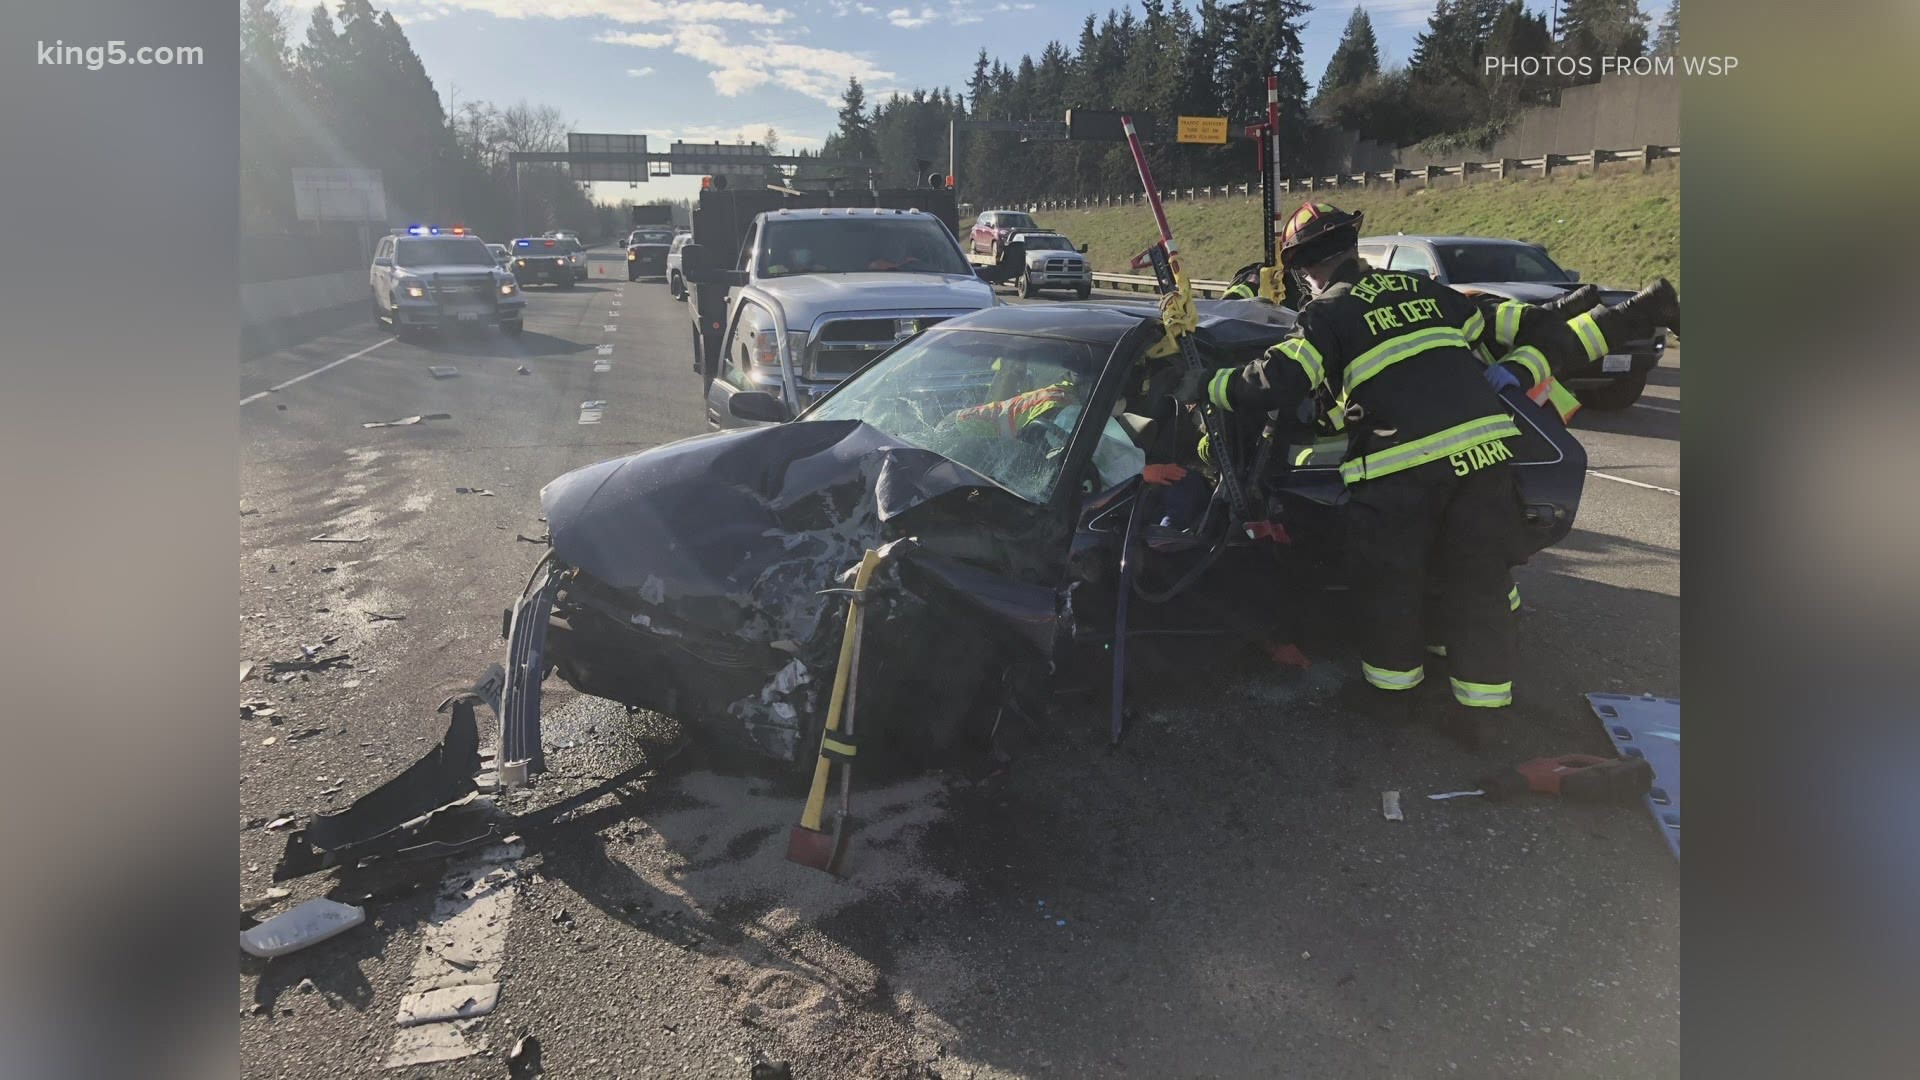 The Washington State Patrol said the causing driver was traveling south in the northbound lanes and hit another vehicle head-on just south of Broadway.